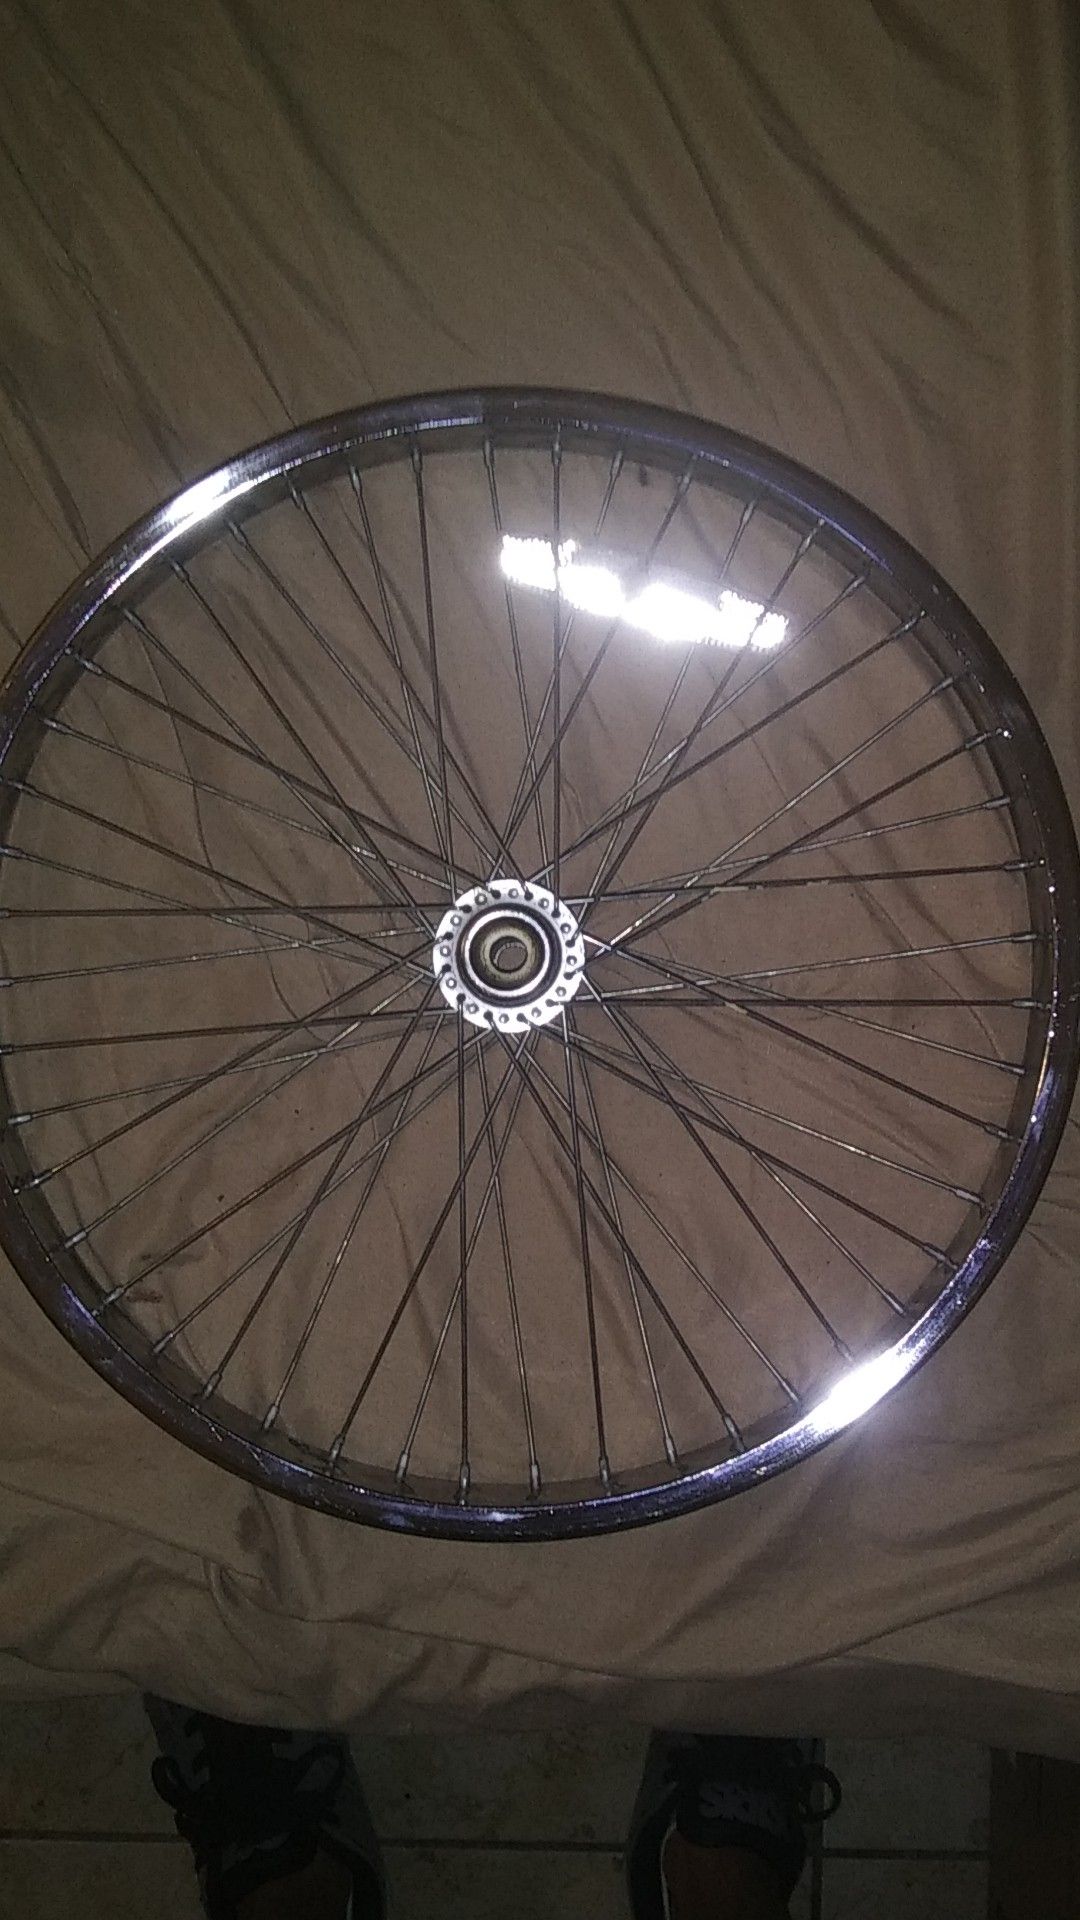 Single chrome back 20 inch rim double wall rim. Great condition.